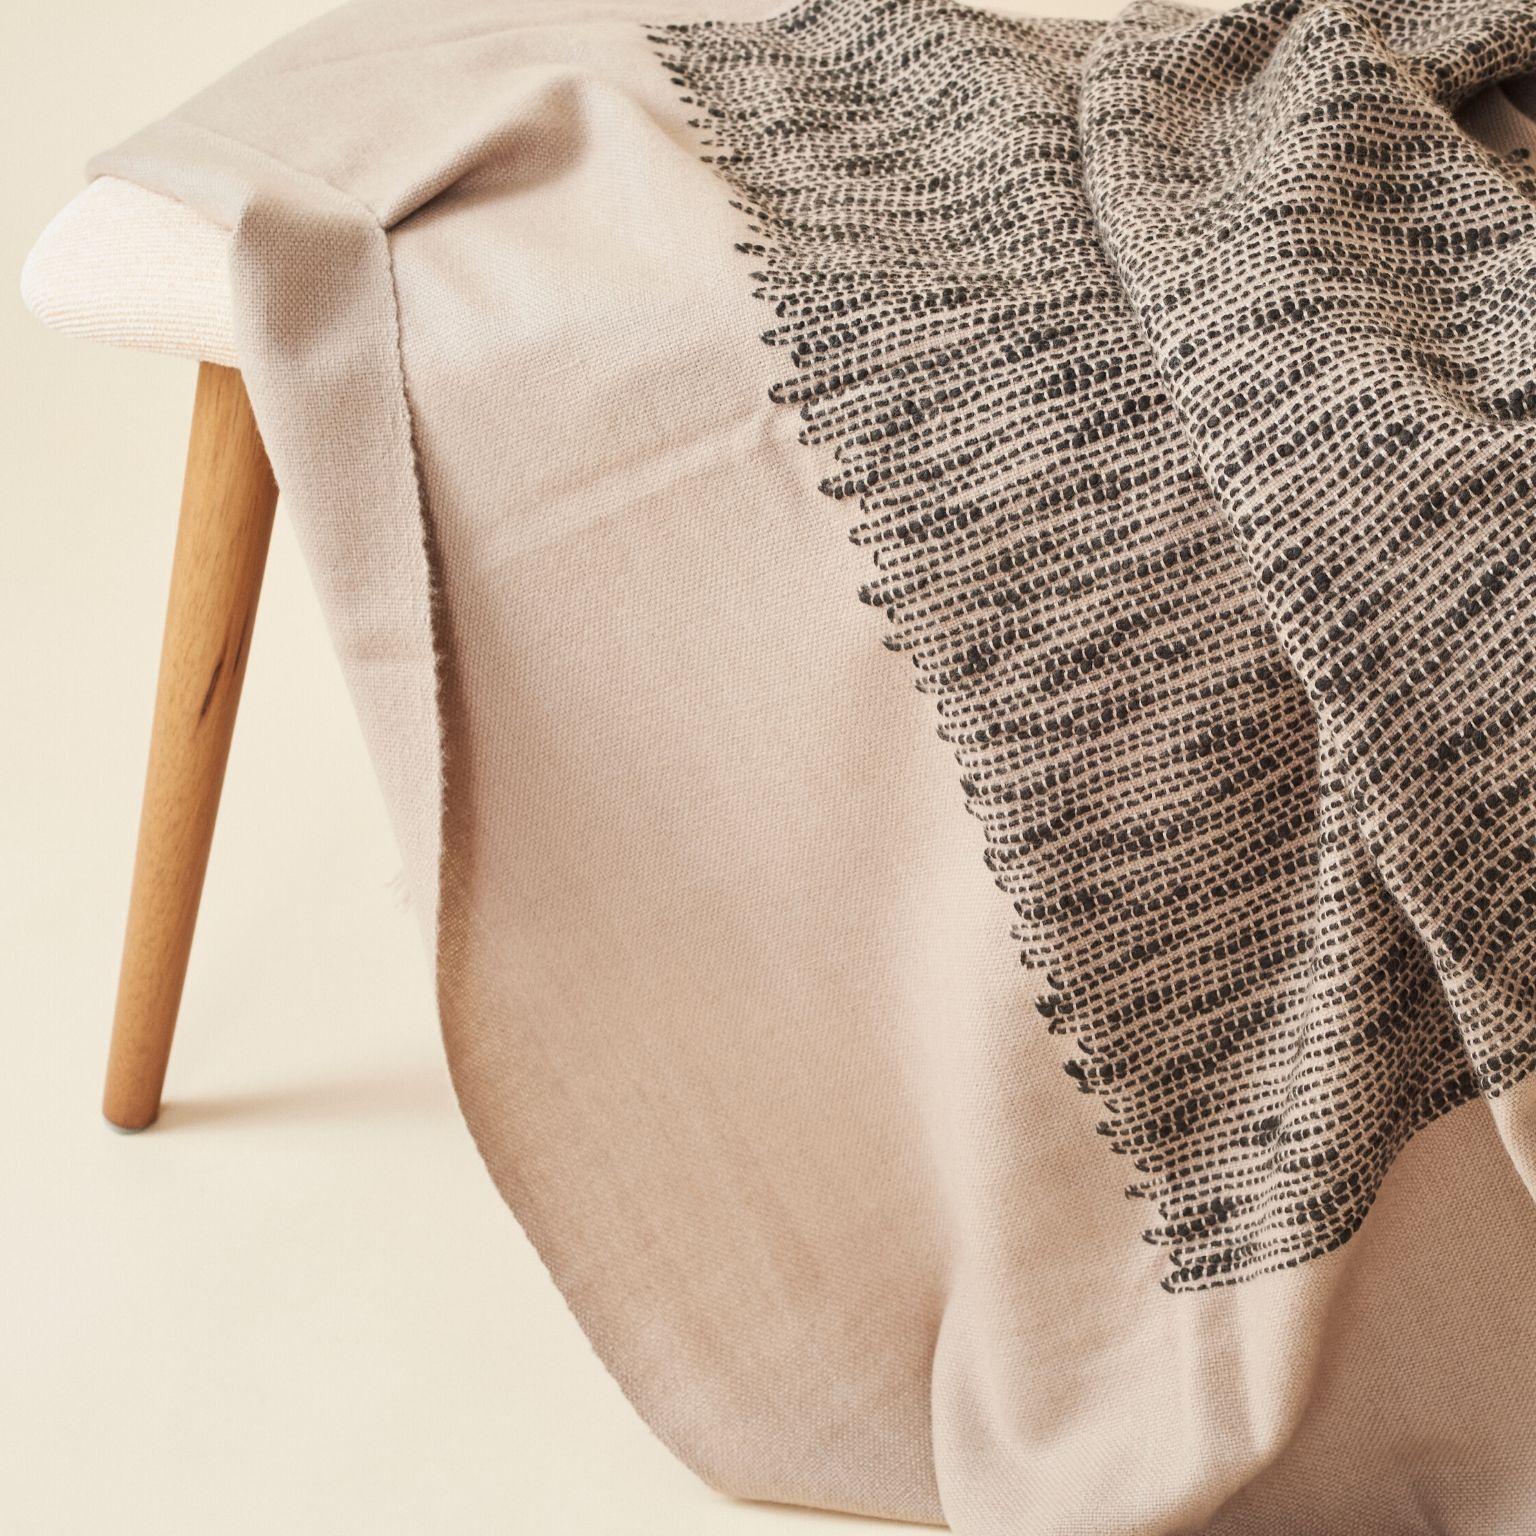 Custom design by Studio Variously, FLO Merino Throw / Blanket is a large square textile handwoven by master weavers in Nepal and dyed entirely with earth-friendly dyes. 

A sustainable design brand based out of Michigan, Studio Variously exclusively